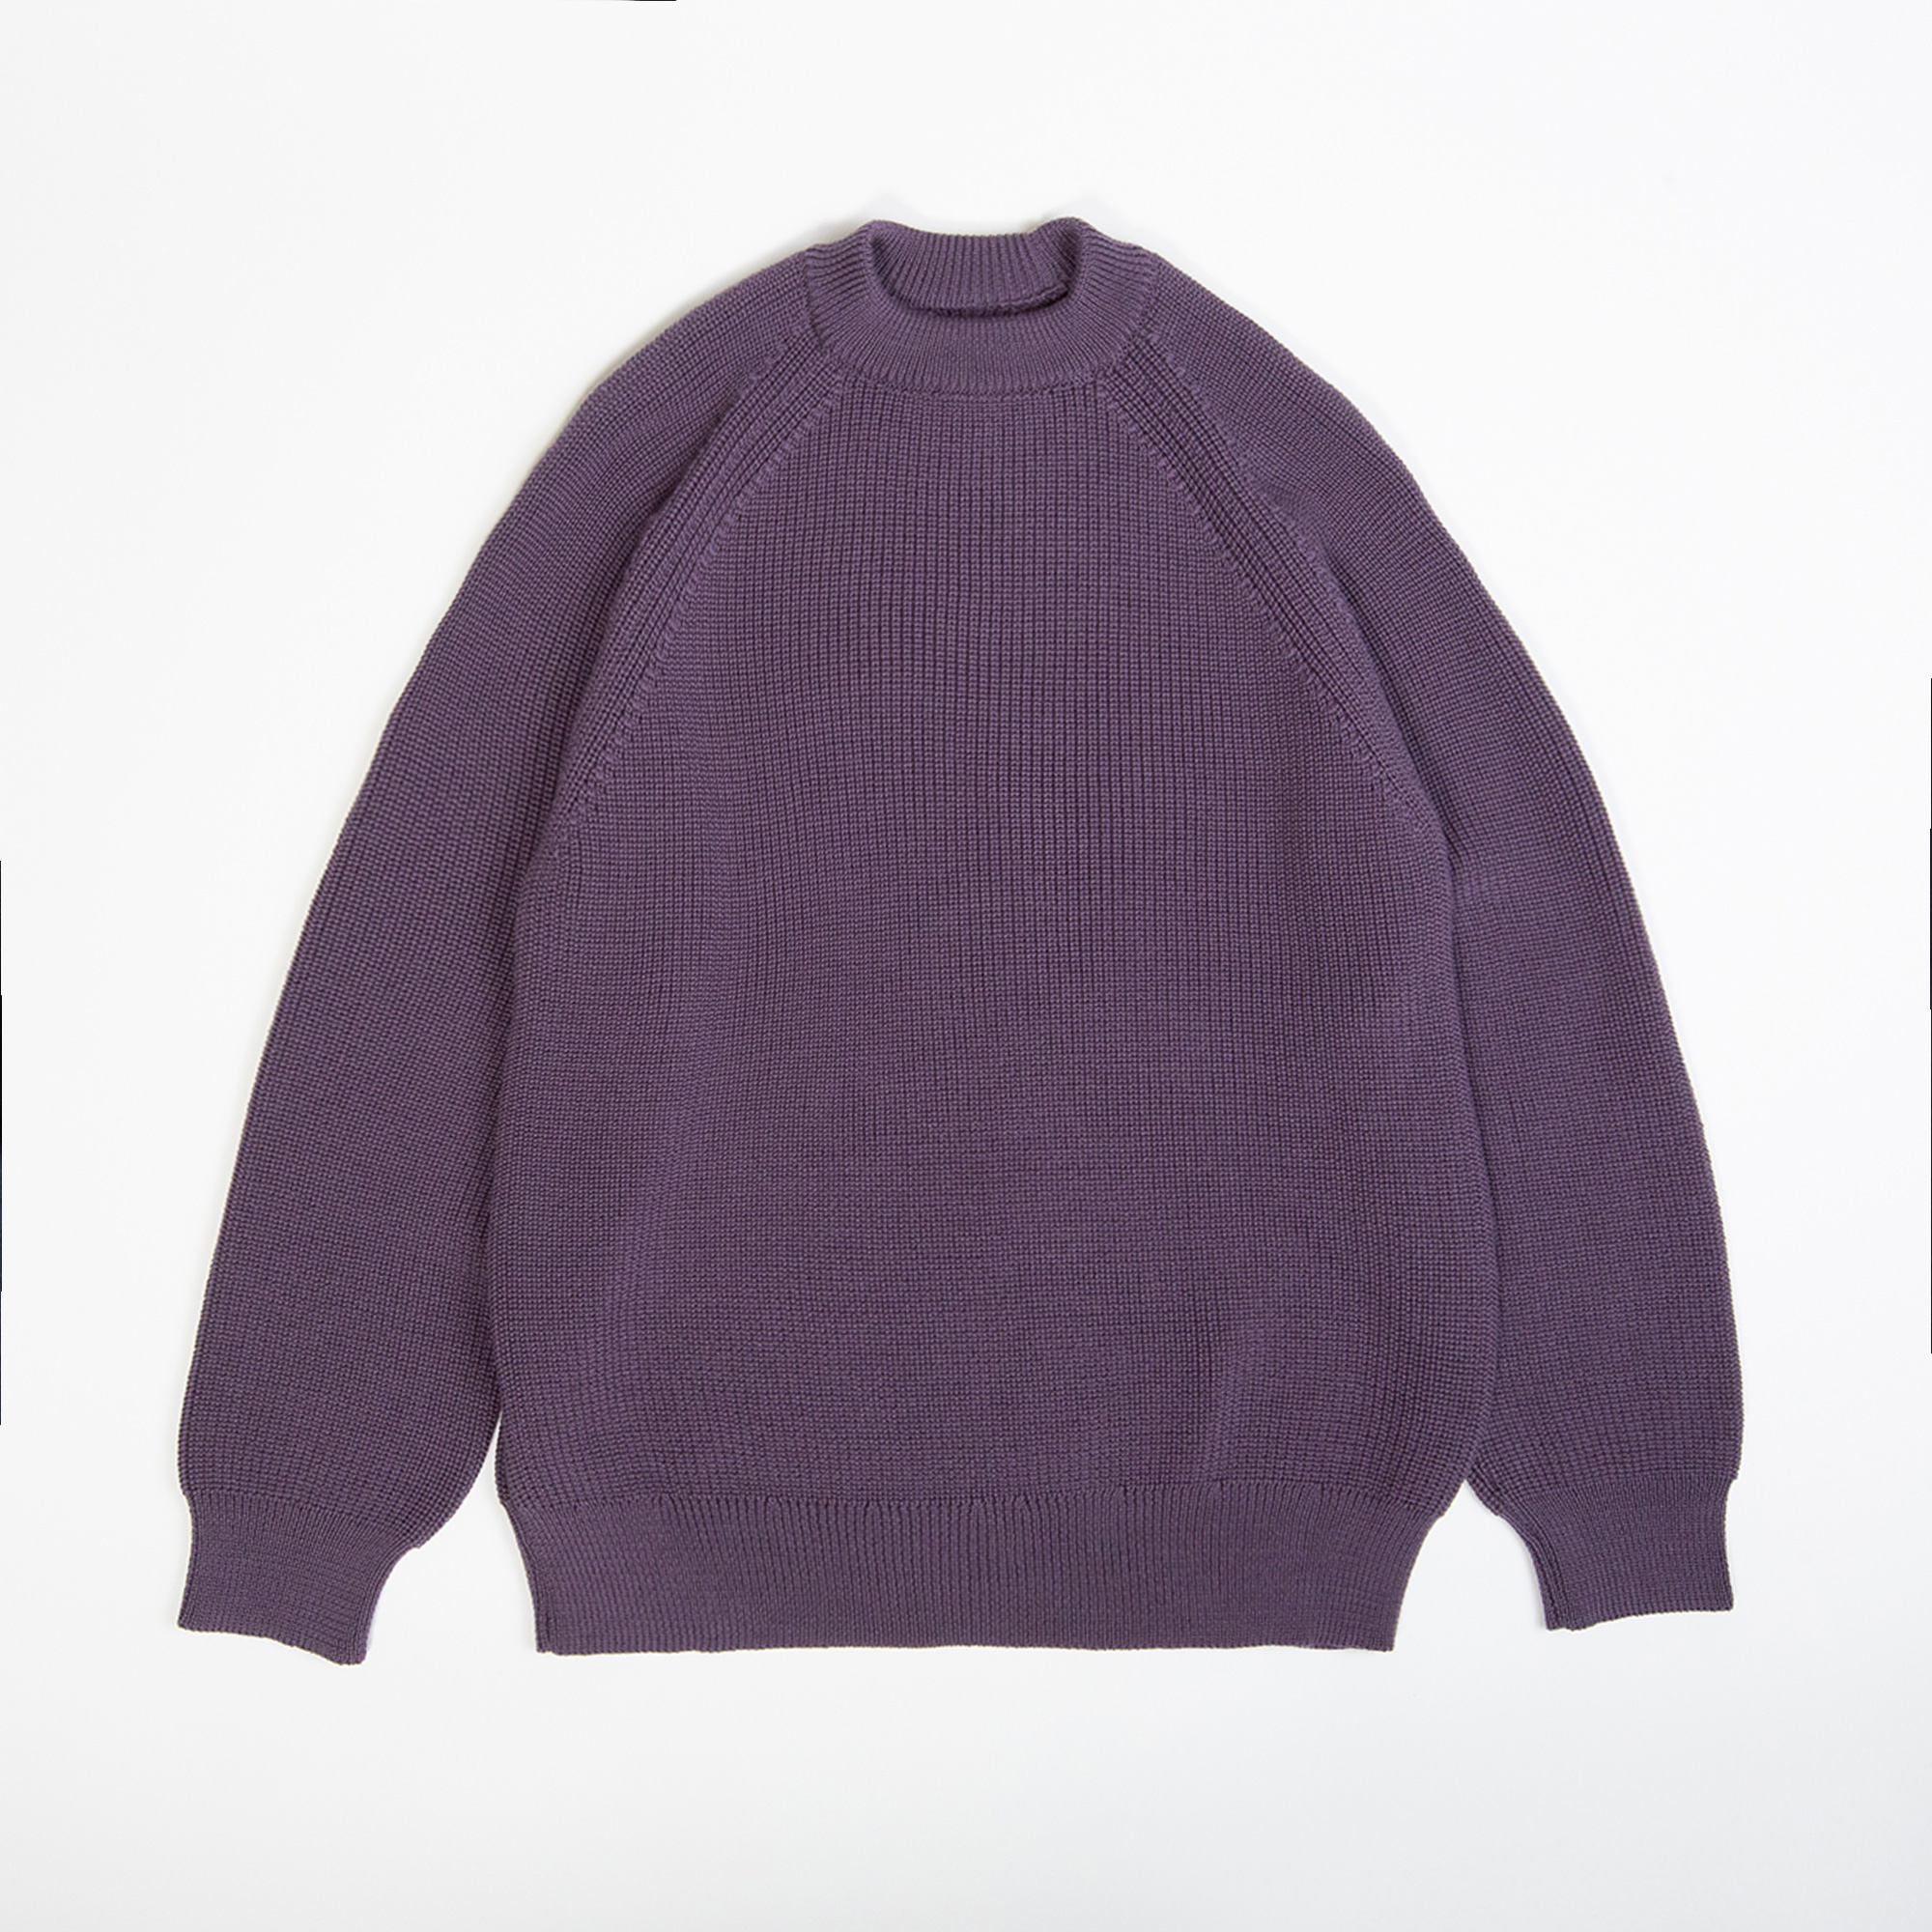 PLANO sweater in Purple color by Arpenteur